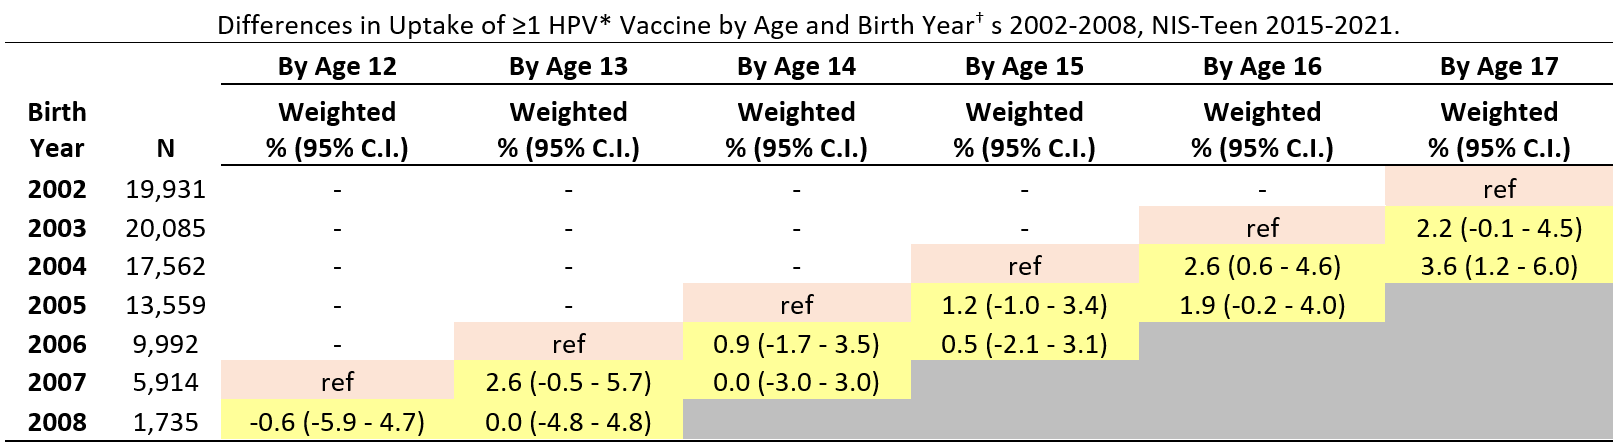 Differences in Uptake of ≥1 HPV* Vaccine by Age and Birth Year† s 2002-2008, NIS-Teen 2015-2021